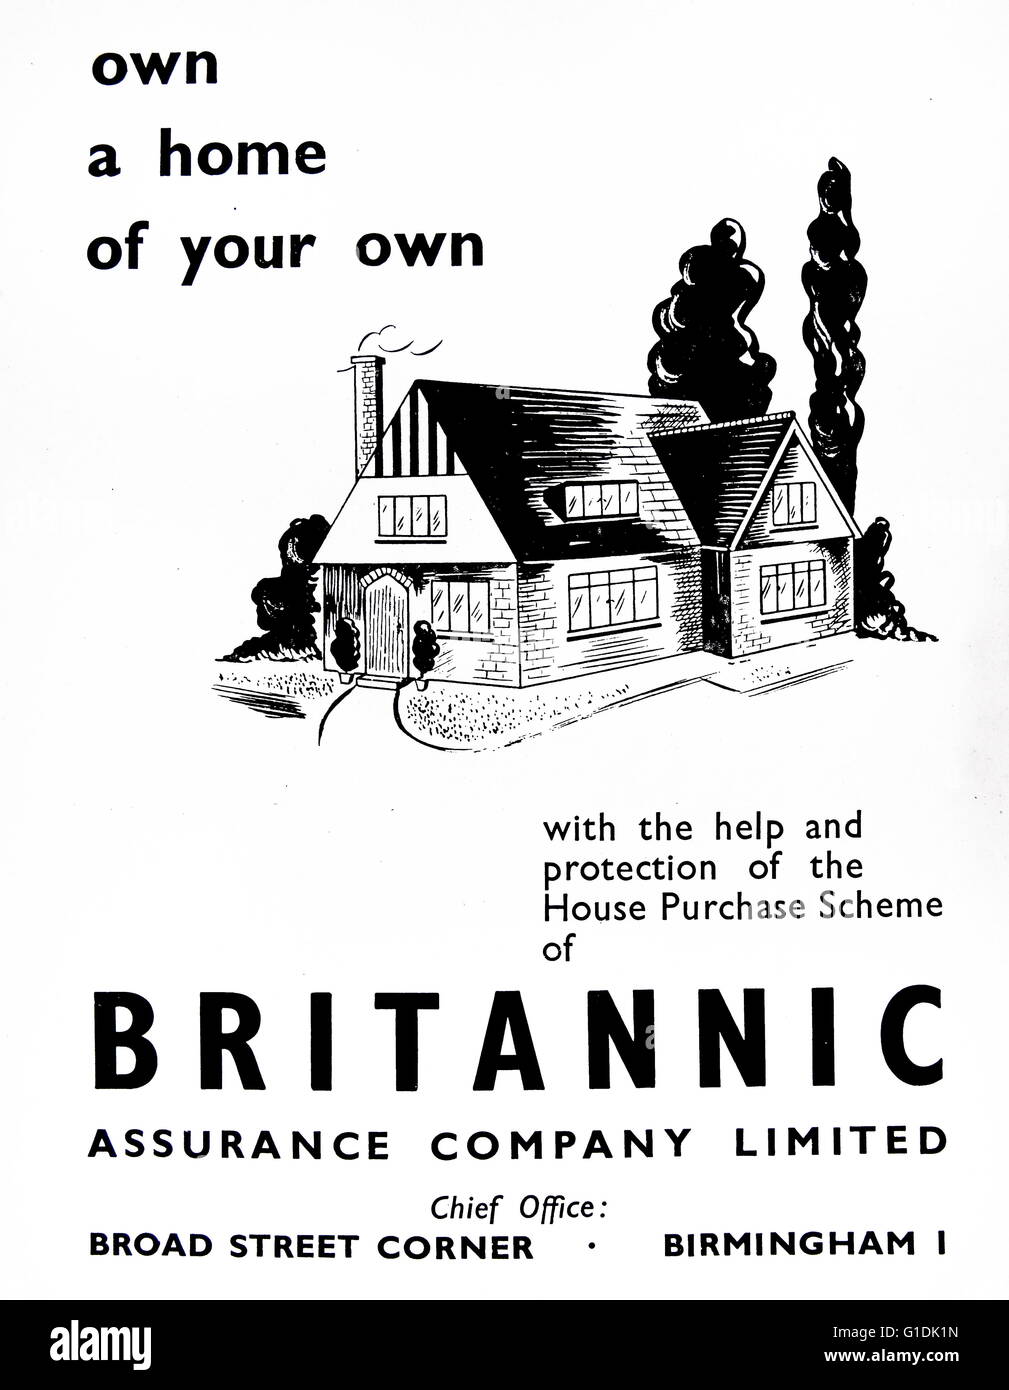 Advert for the protection of the House Purchase Scheme of Britannic Assurance Company Limited Stock Photo